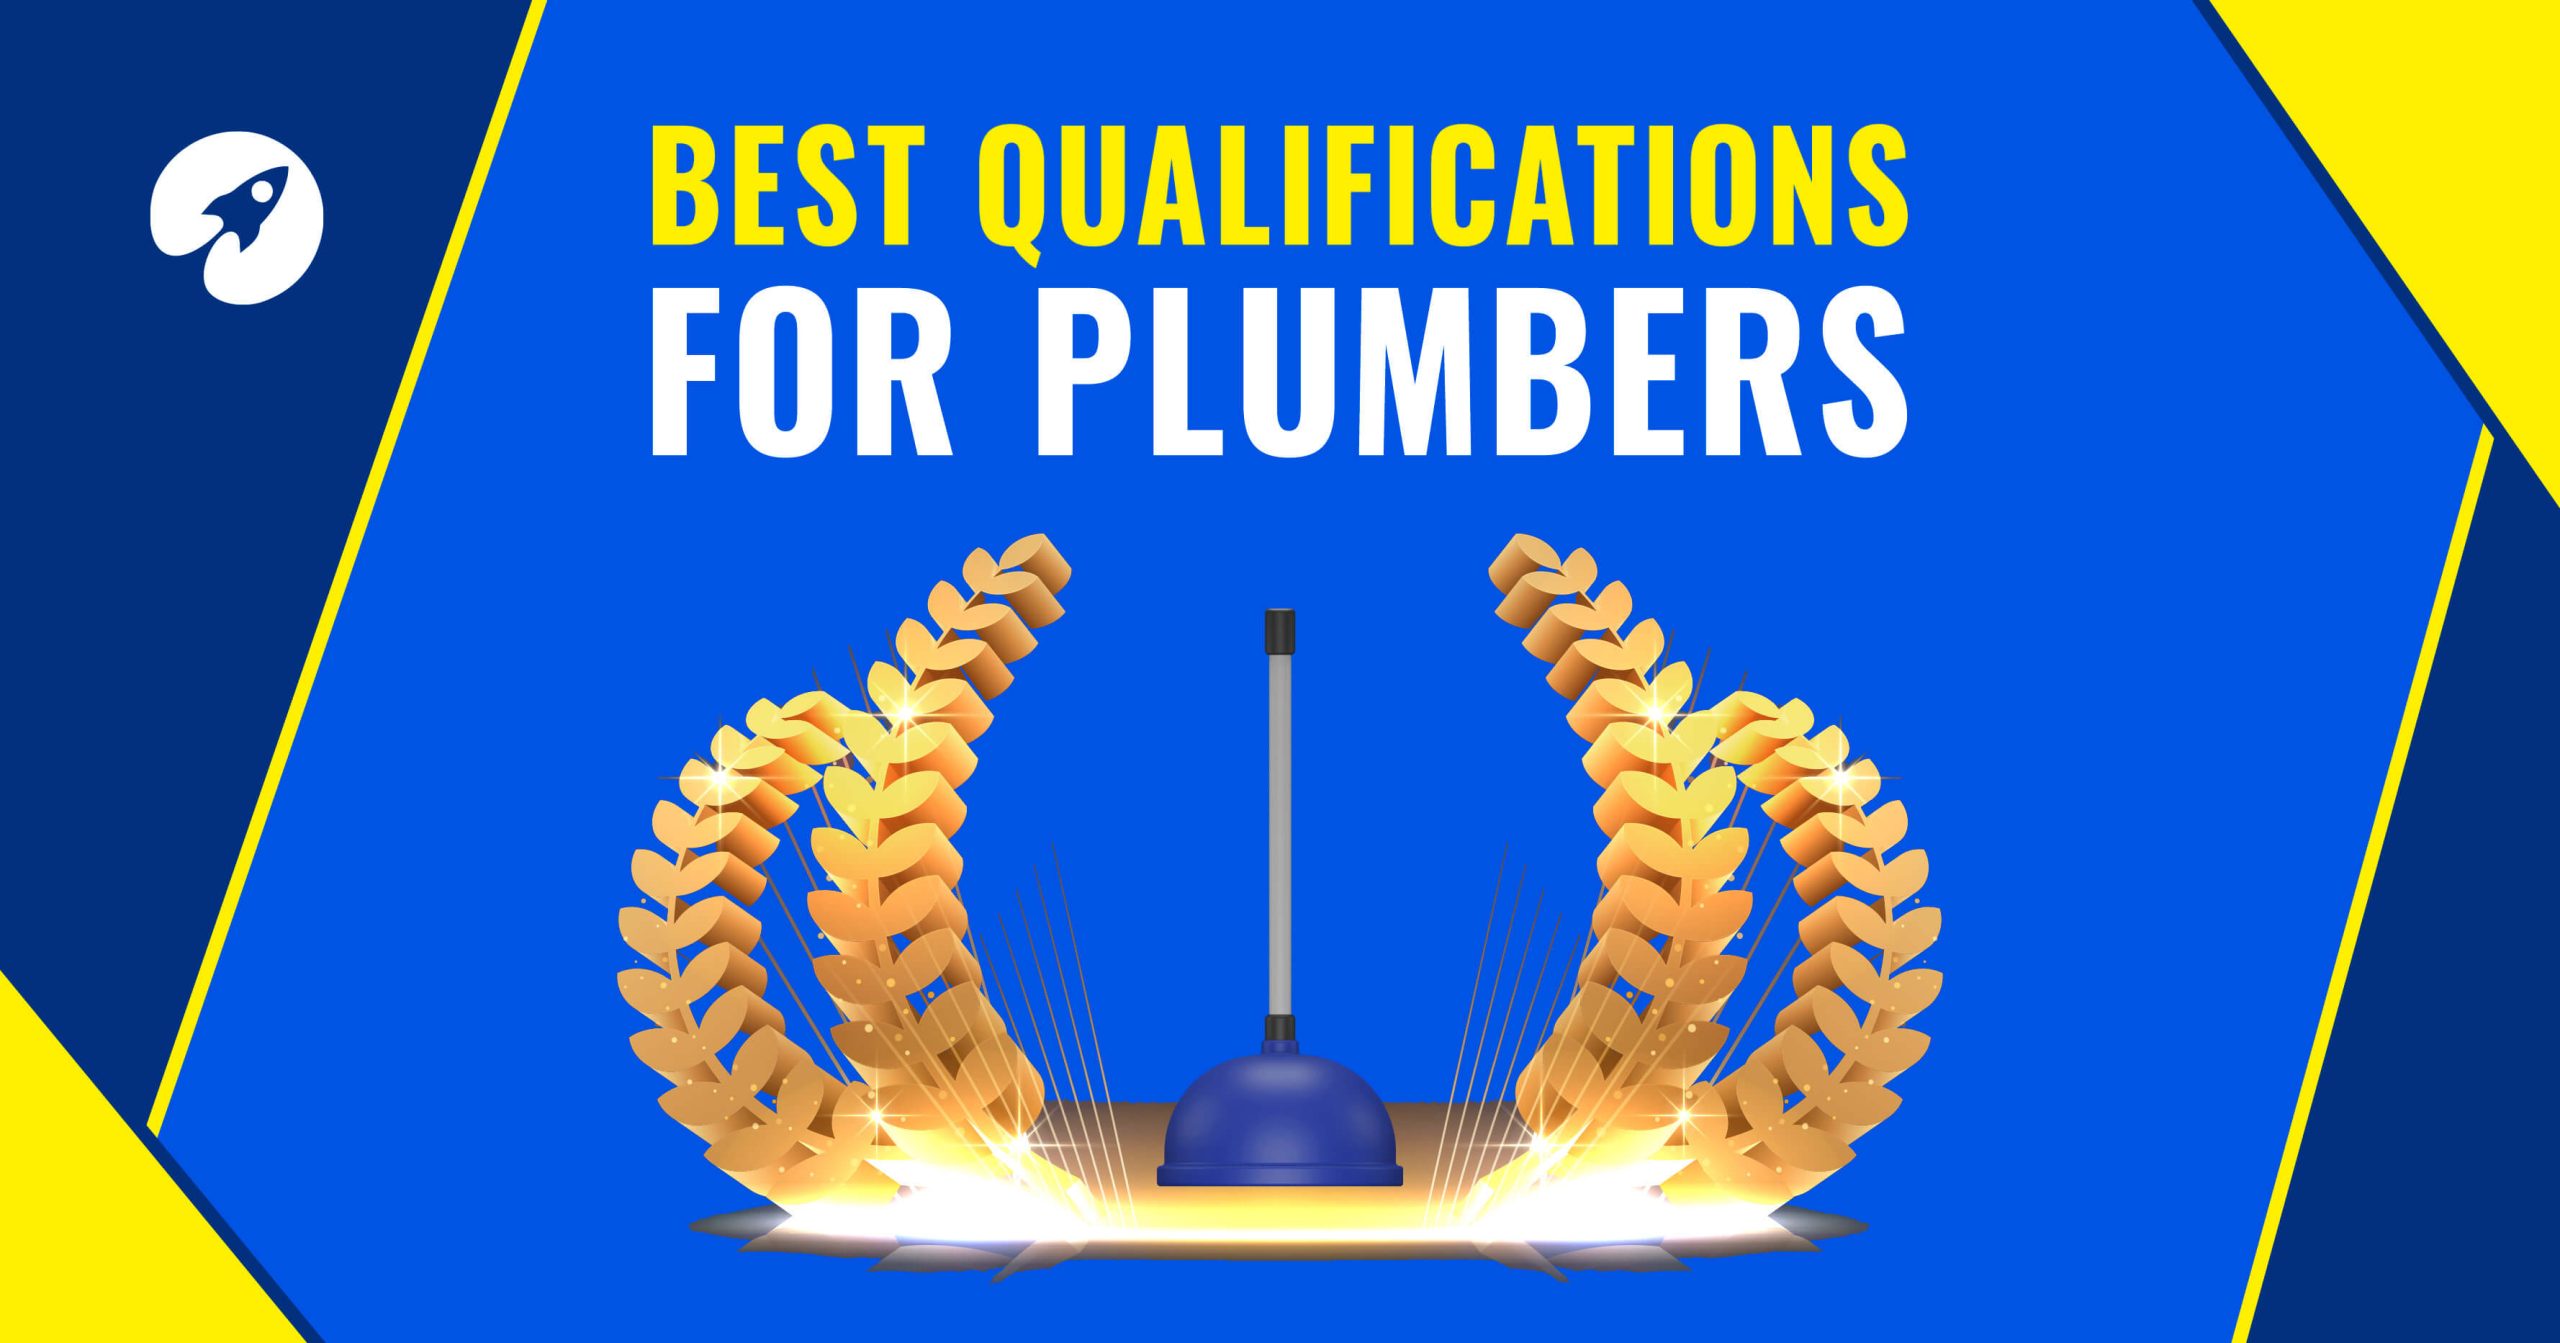 What qualifications should a plumber have